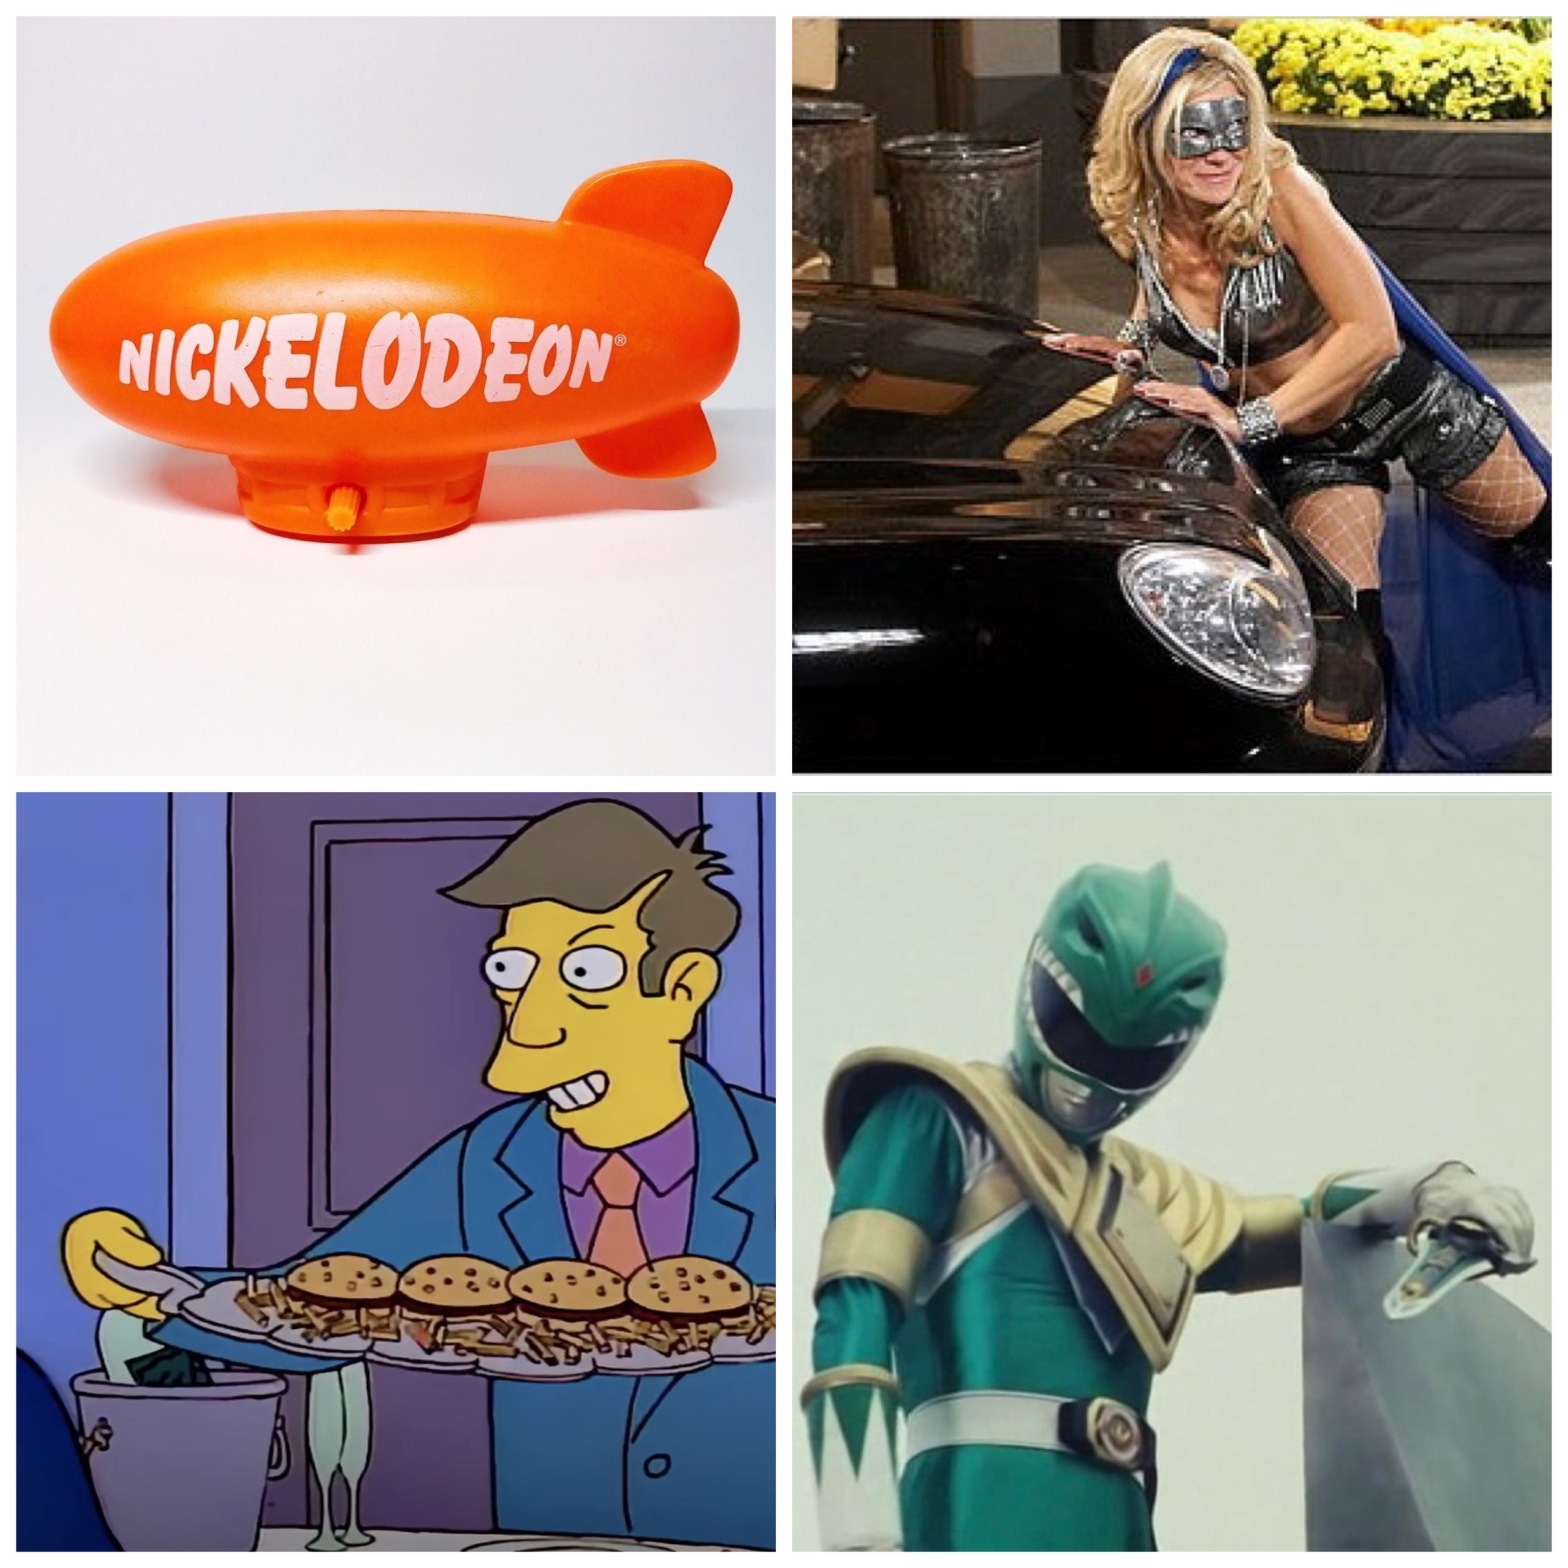 A Nickelodeon Kids' Choice Award blimp, the Guiding Light/Marvel Comics crossover, steamed hams from The Simpsons, and Tommy Oliver from Power Rangers.